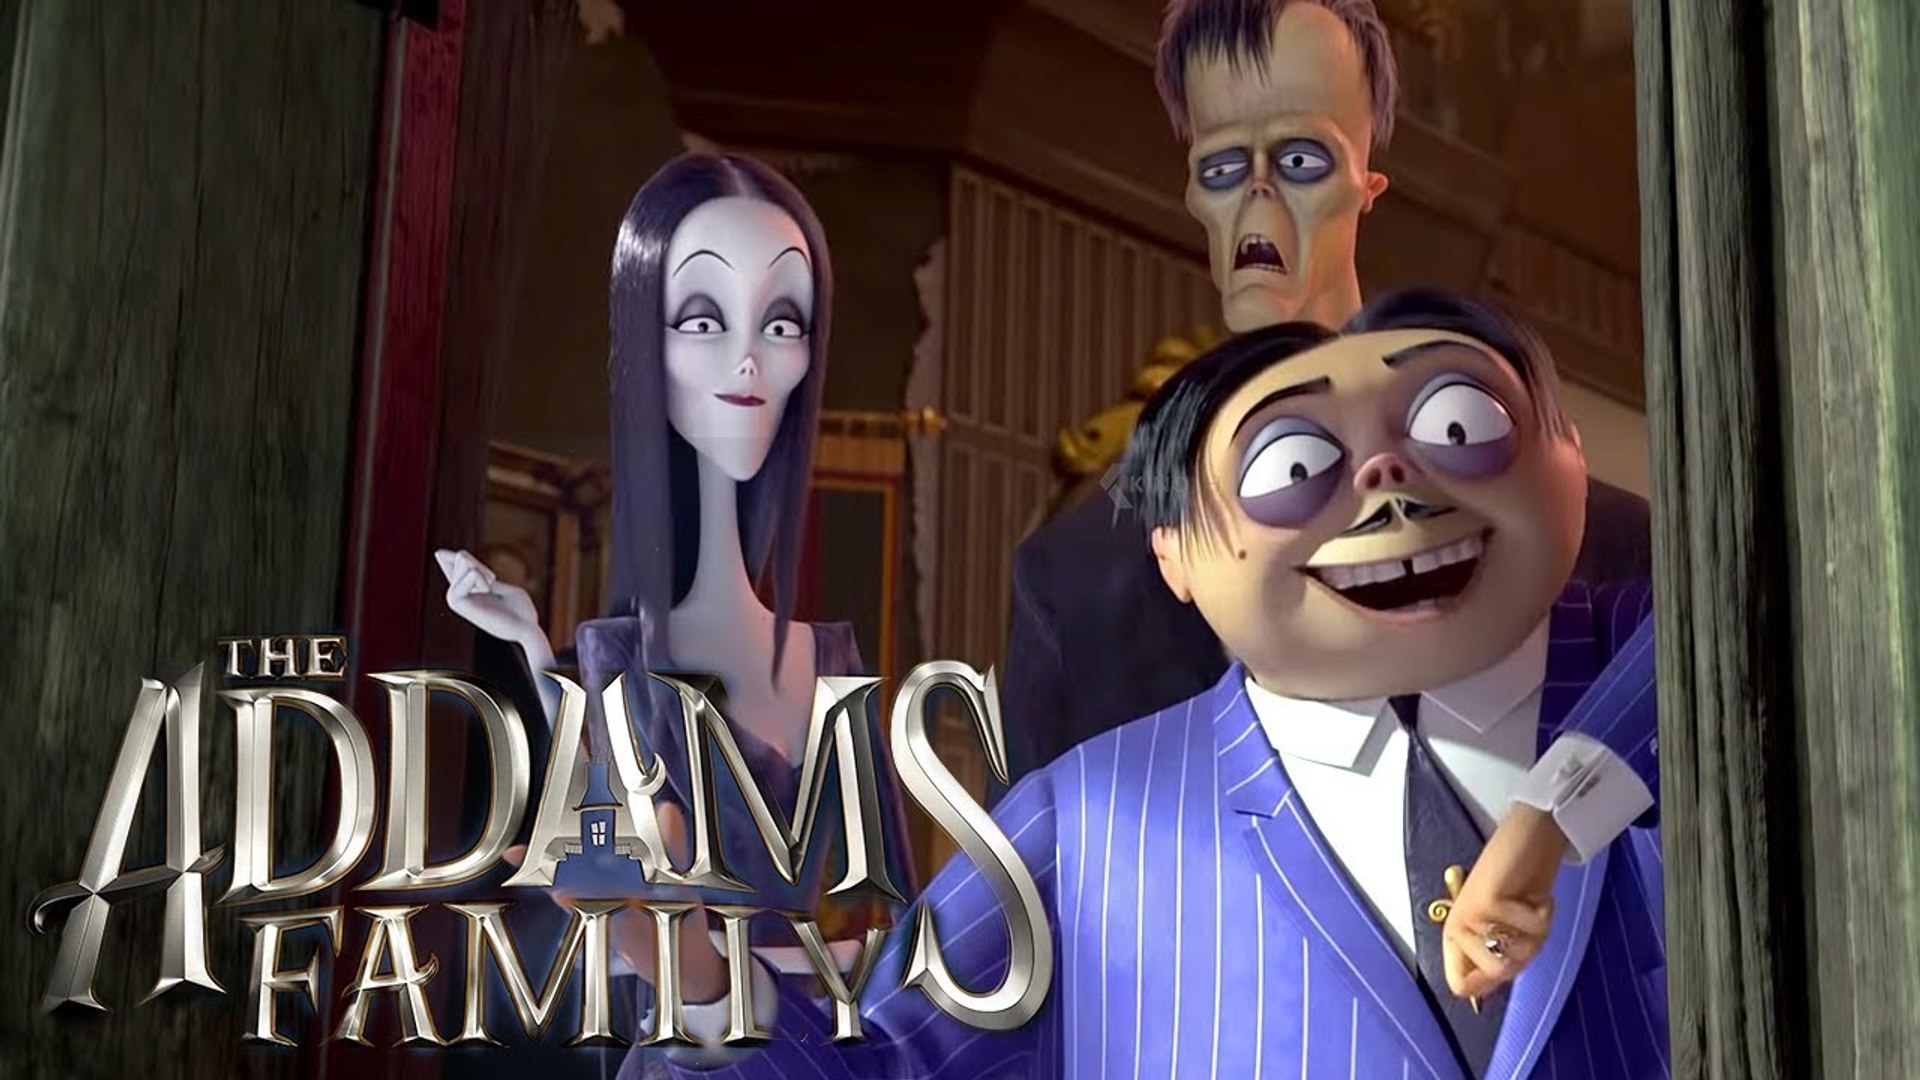 THE ADDAMS FAMILY Trailer 2 (2019) - video Dailymotion